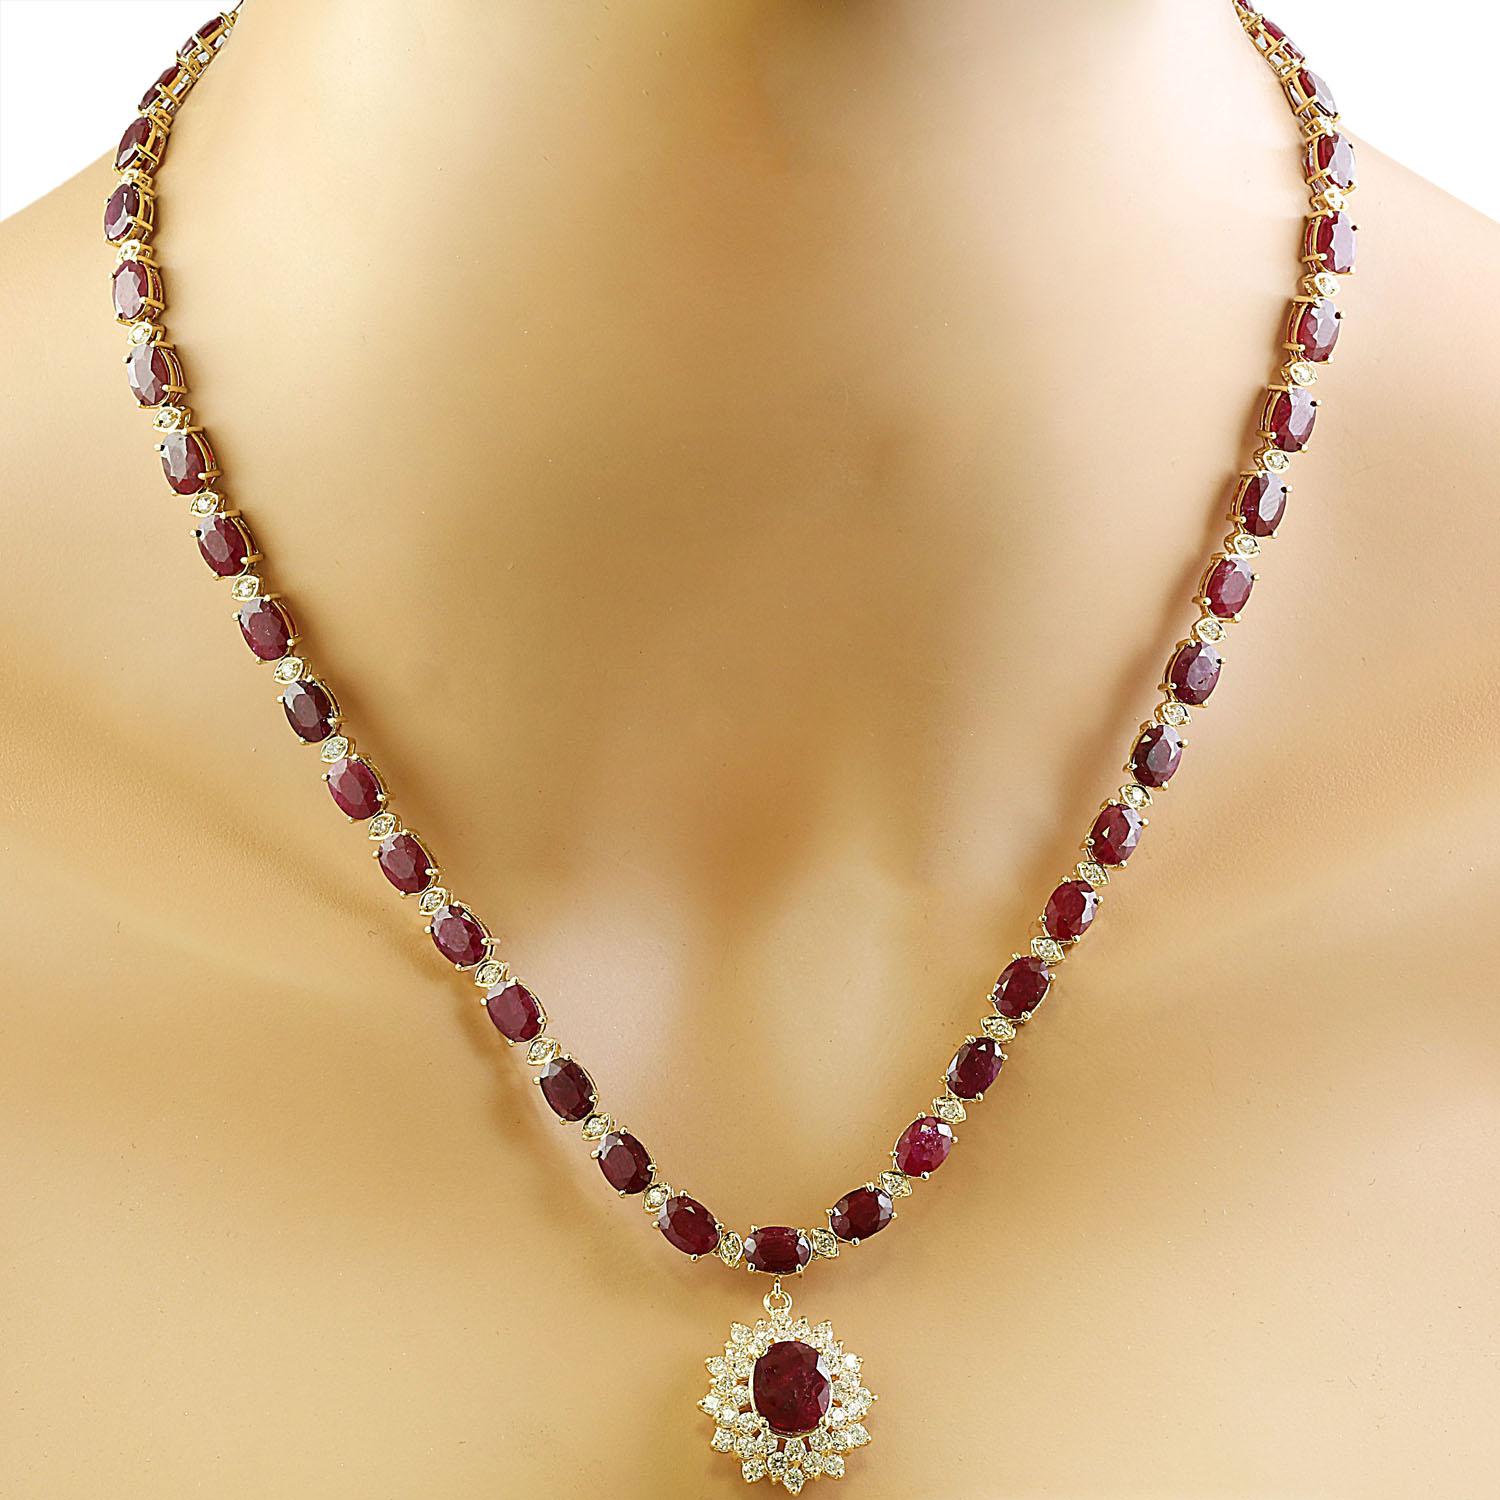 46.40 Carat Natural Ruby 14 Karat Solid Yellow Gold Diamond Necklace
Stamped: 14K
Total Necklace Weight: 30.8 Grams
Necklace Length: 18.5 Inches
Center Ruby Weight: 2.20 Carat (10.00x8.00 Millimeters)
Side Ruby Weight: 41.00 Carat (6.00x4.00